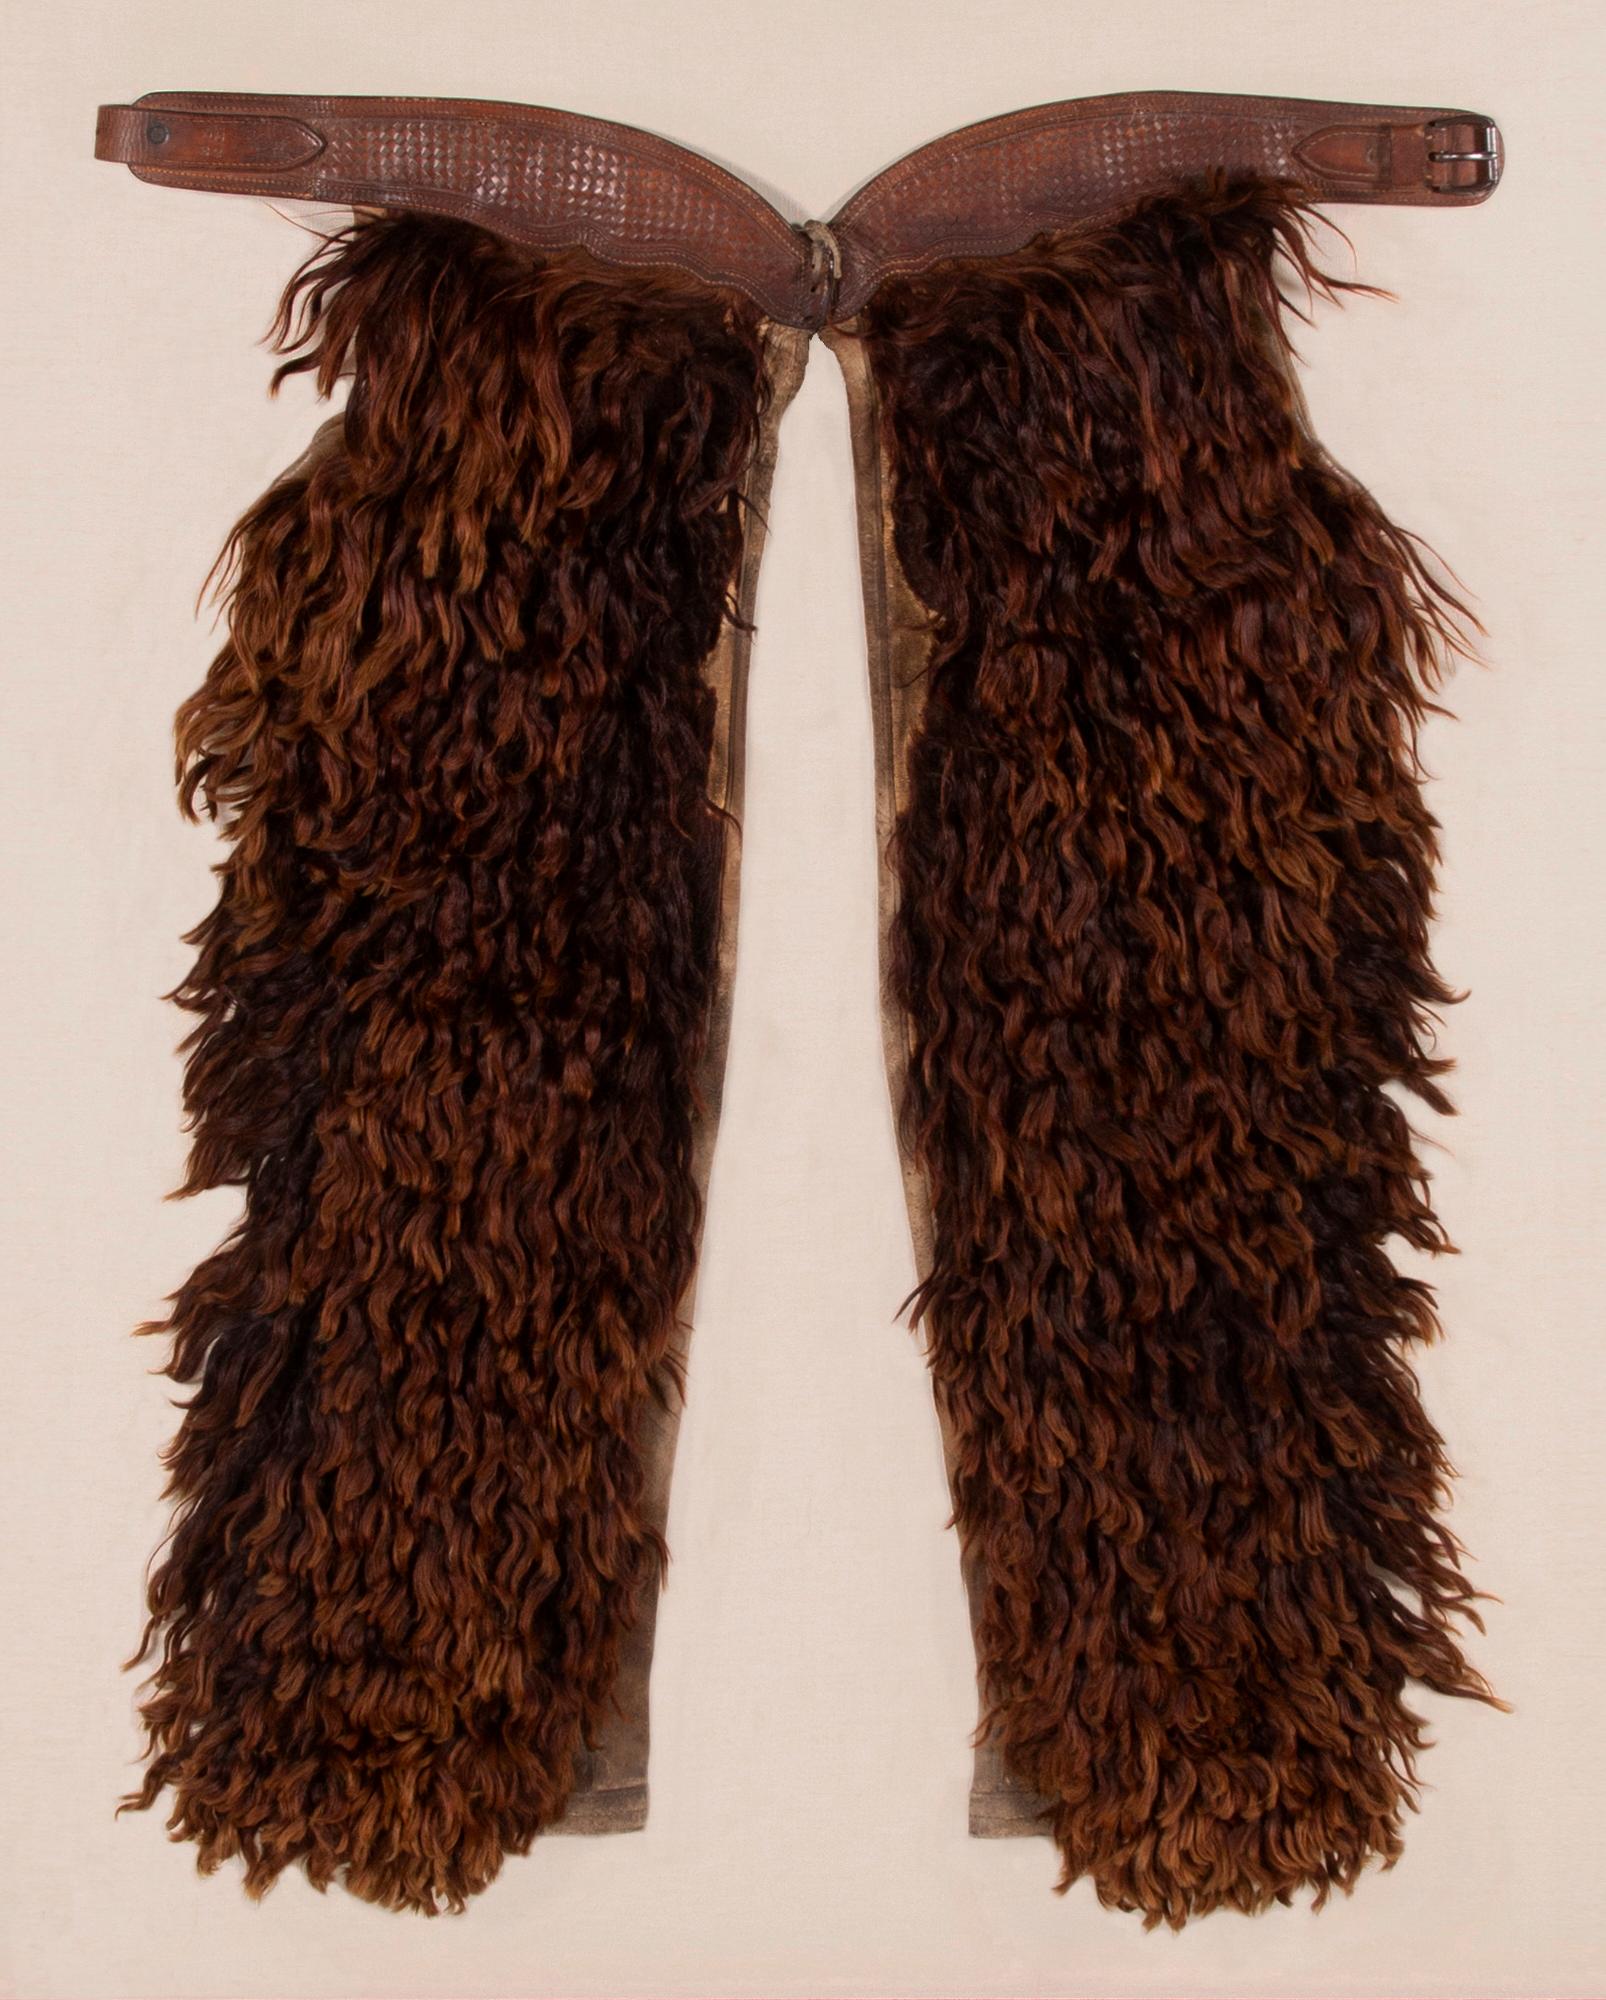 WOOLY, Angora chaps with beautifully tooled leather, made by the JOHN CLARK SADDLERY COMPANY OF PORTLAND, OREGON, SIGNED, CIRCA 1873-1929

Wooly chaps made of leather and canvas, faced with dyed Angora, made by the John F. Clark Saddlery Company